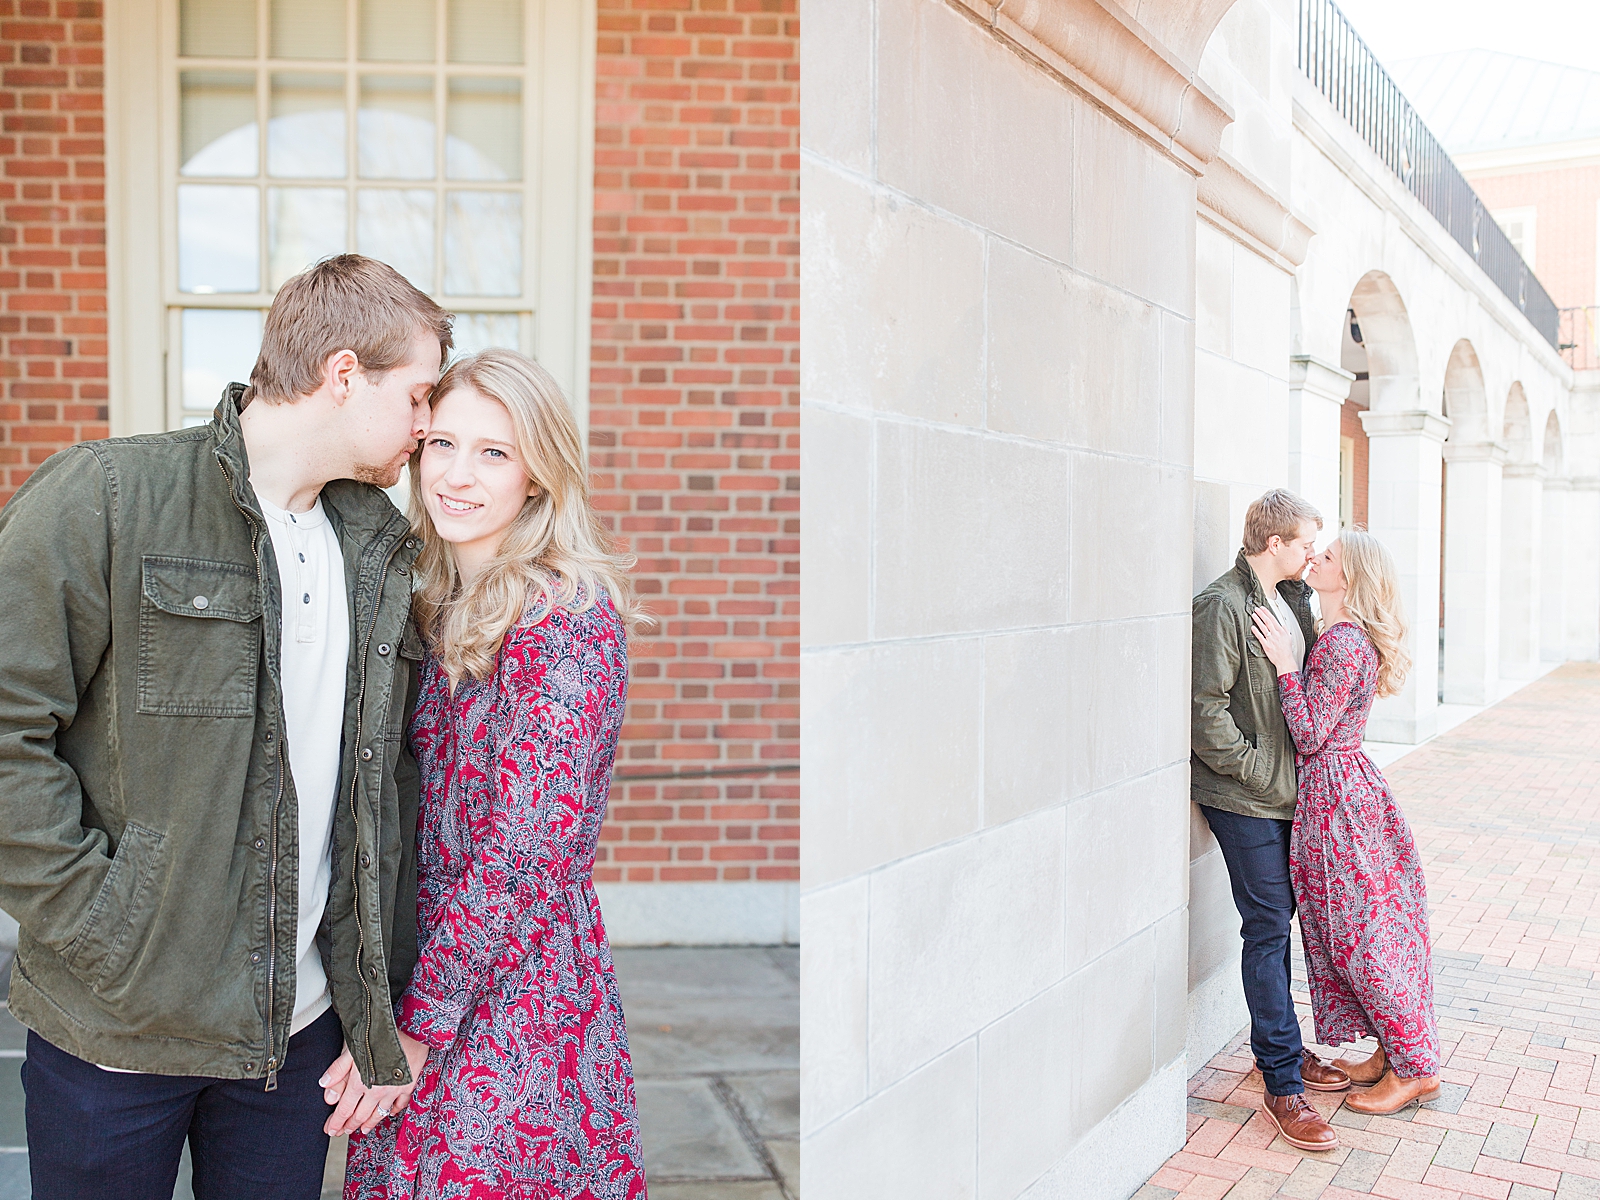 Winston-Salem Engagement Session Chris nuzzling while Katie looks at the camera and couple nose to nose leaning against a wall Photos